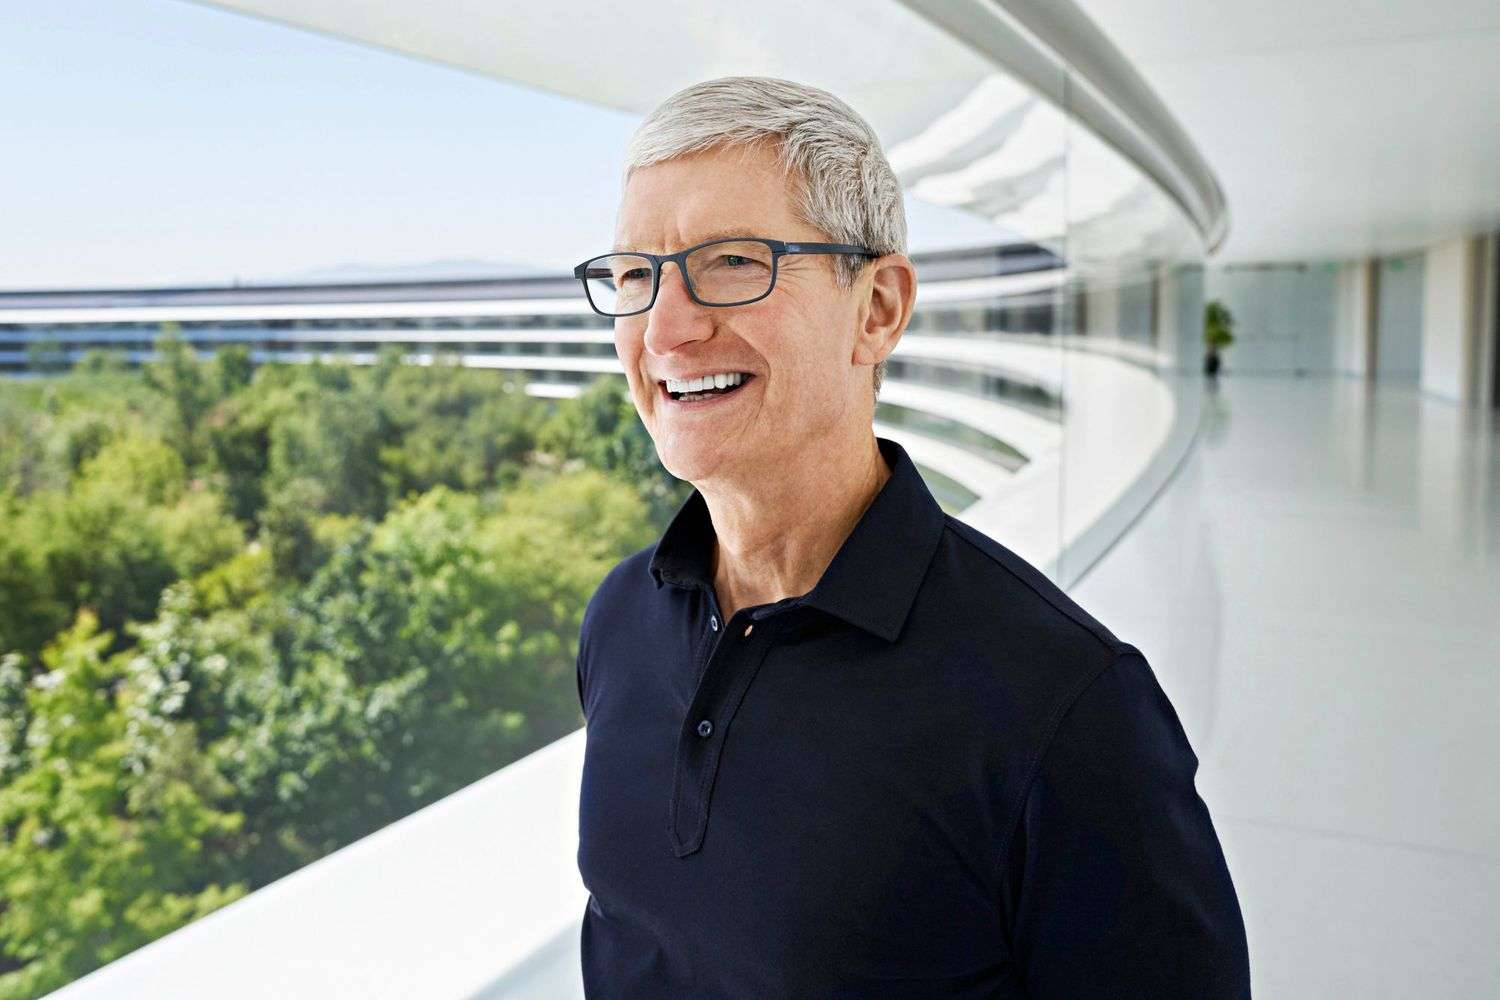 Tim Cook Biography: Age, Wife, Net Worth, Nationality, Siblings, Parents